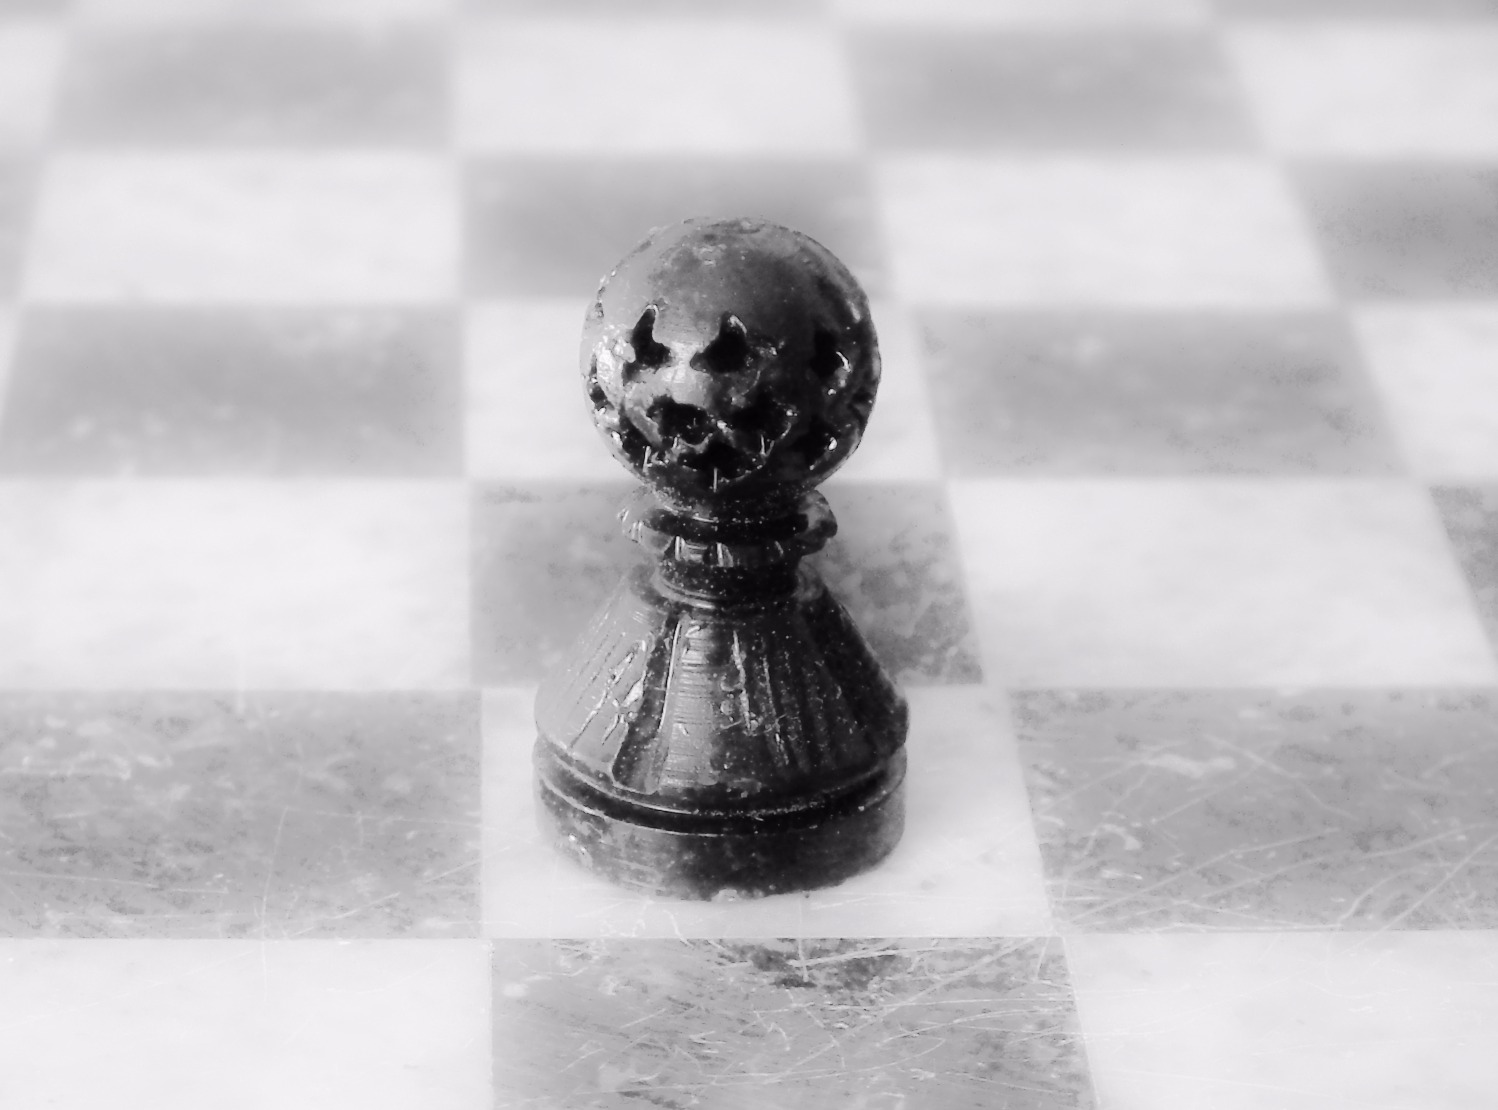 Pawn, Object | Chess | Piece | Black | Black and White | Game